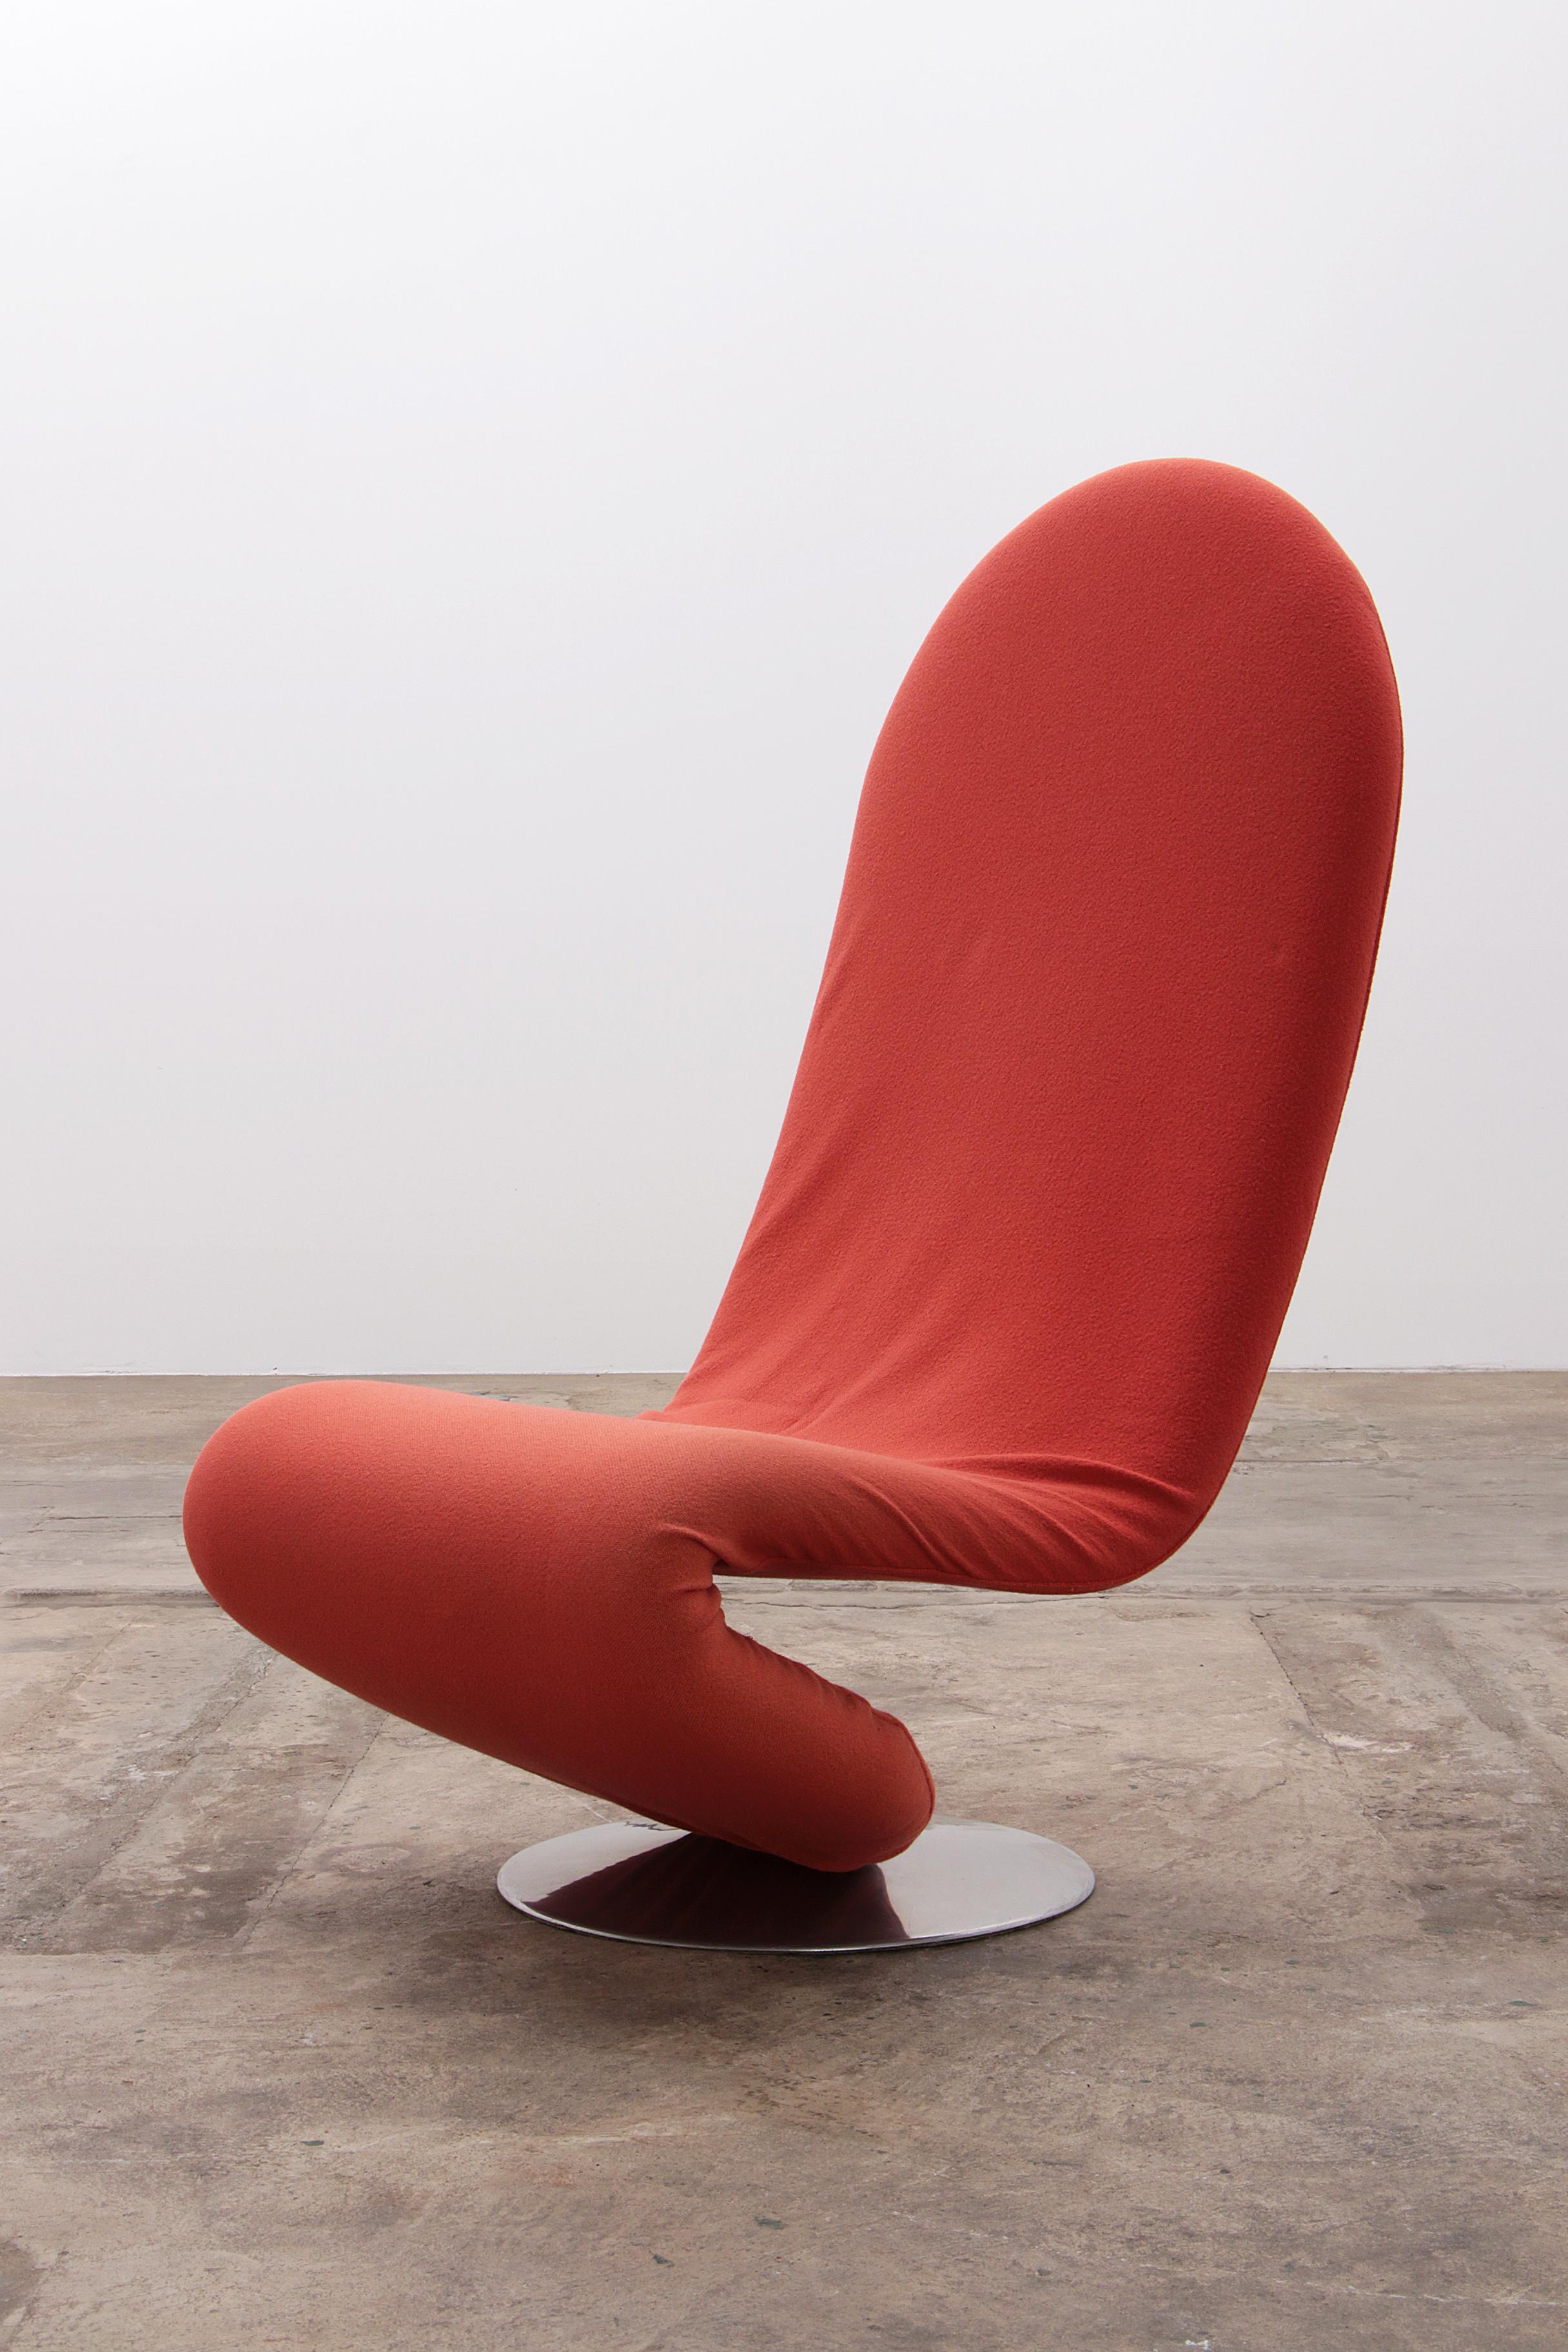 Fabric Verner Panton 1-2-3 Chair with High Backrest - Red/Orange, 1973 For Sale